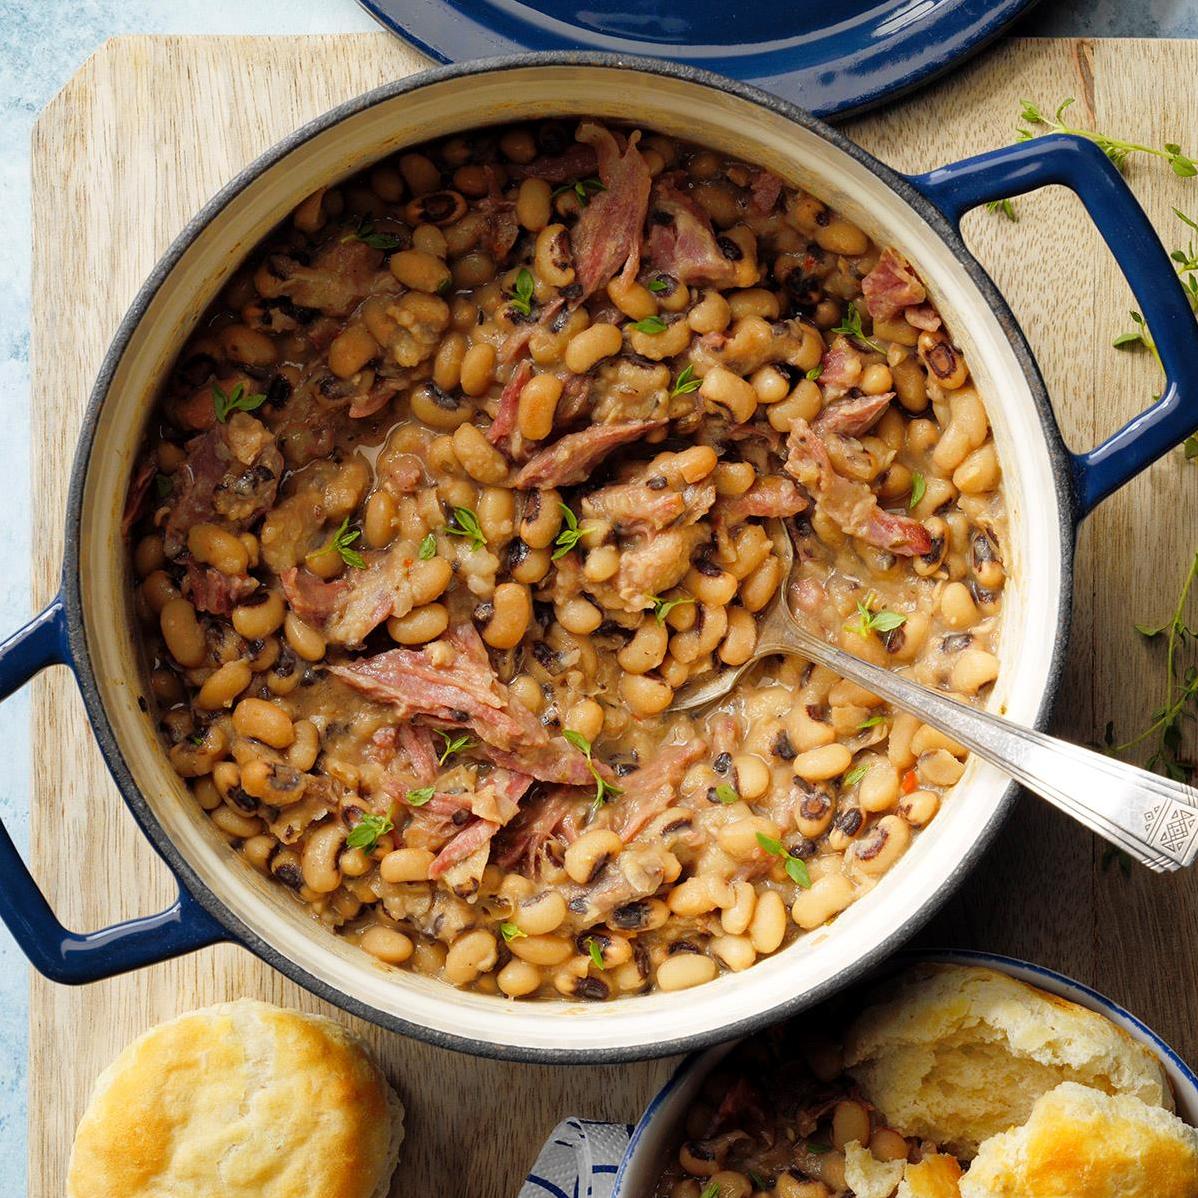  I could eat these black-eyed peas every day!